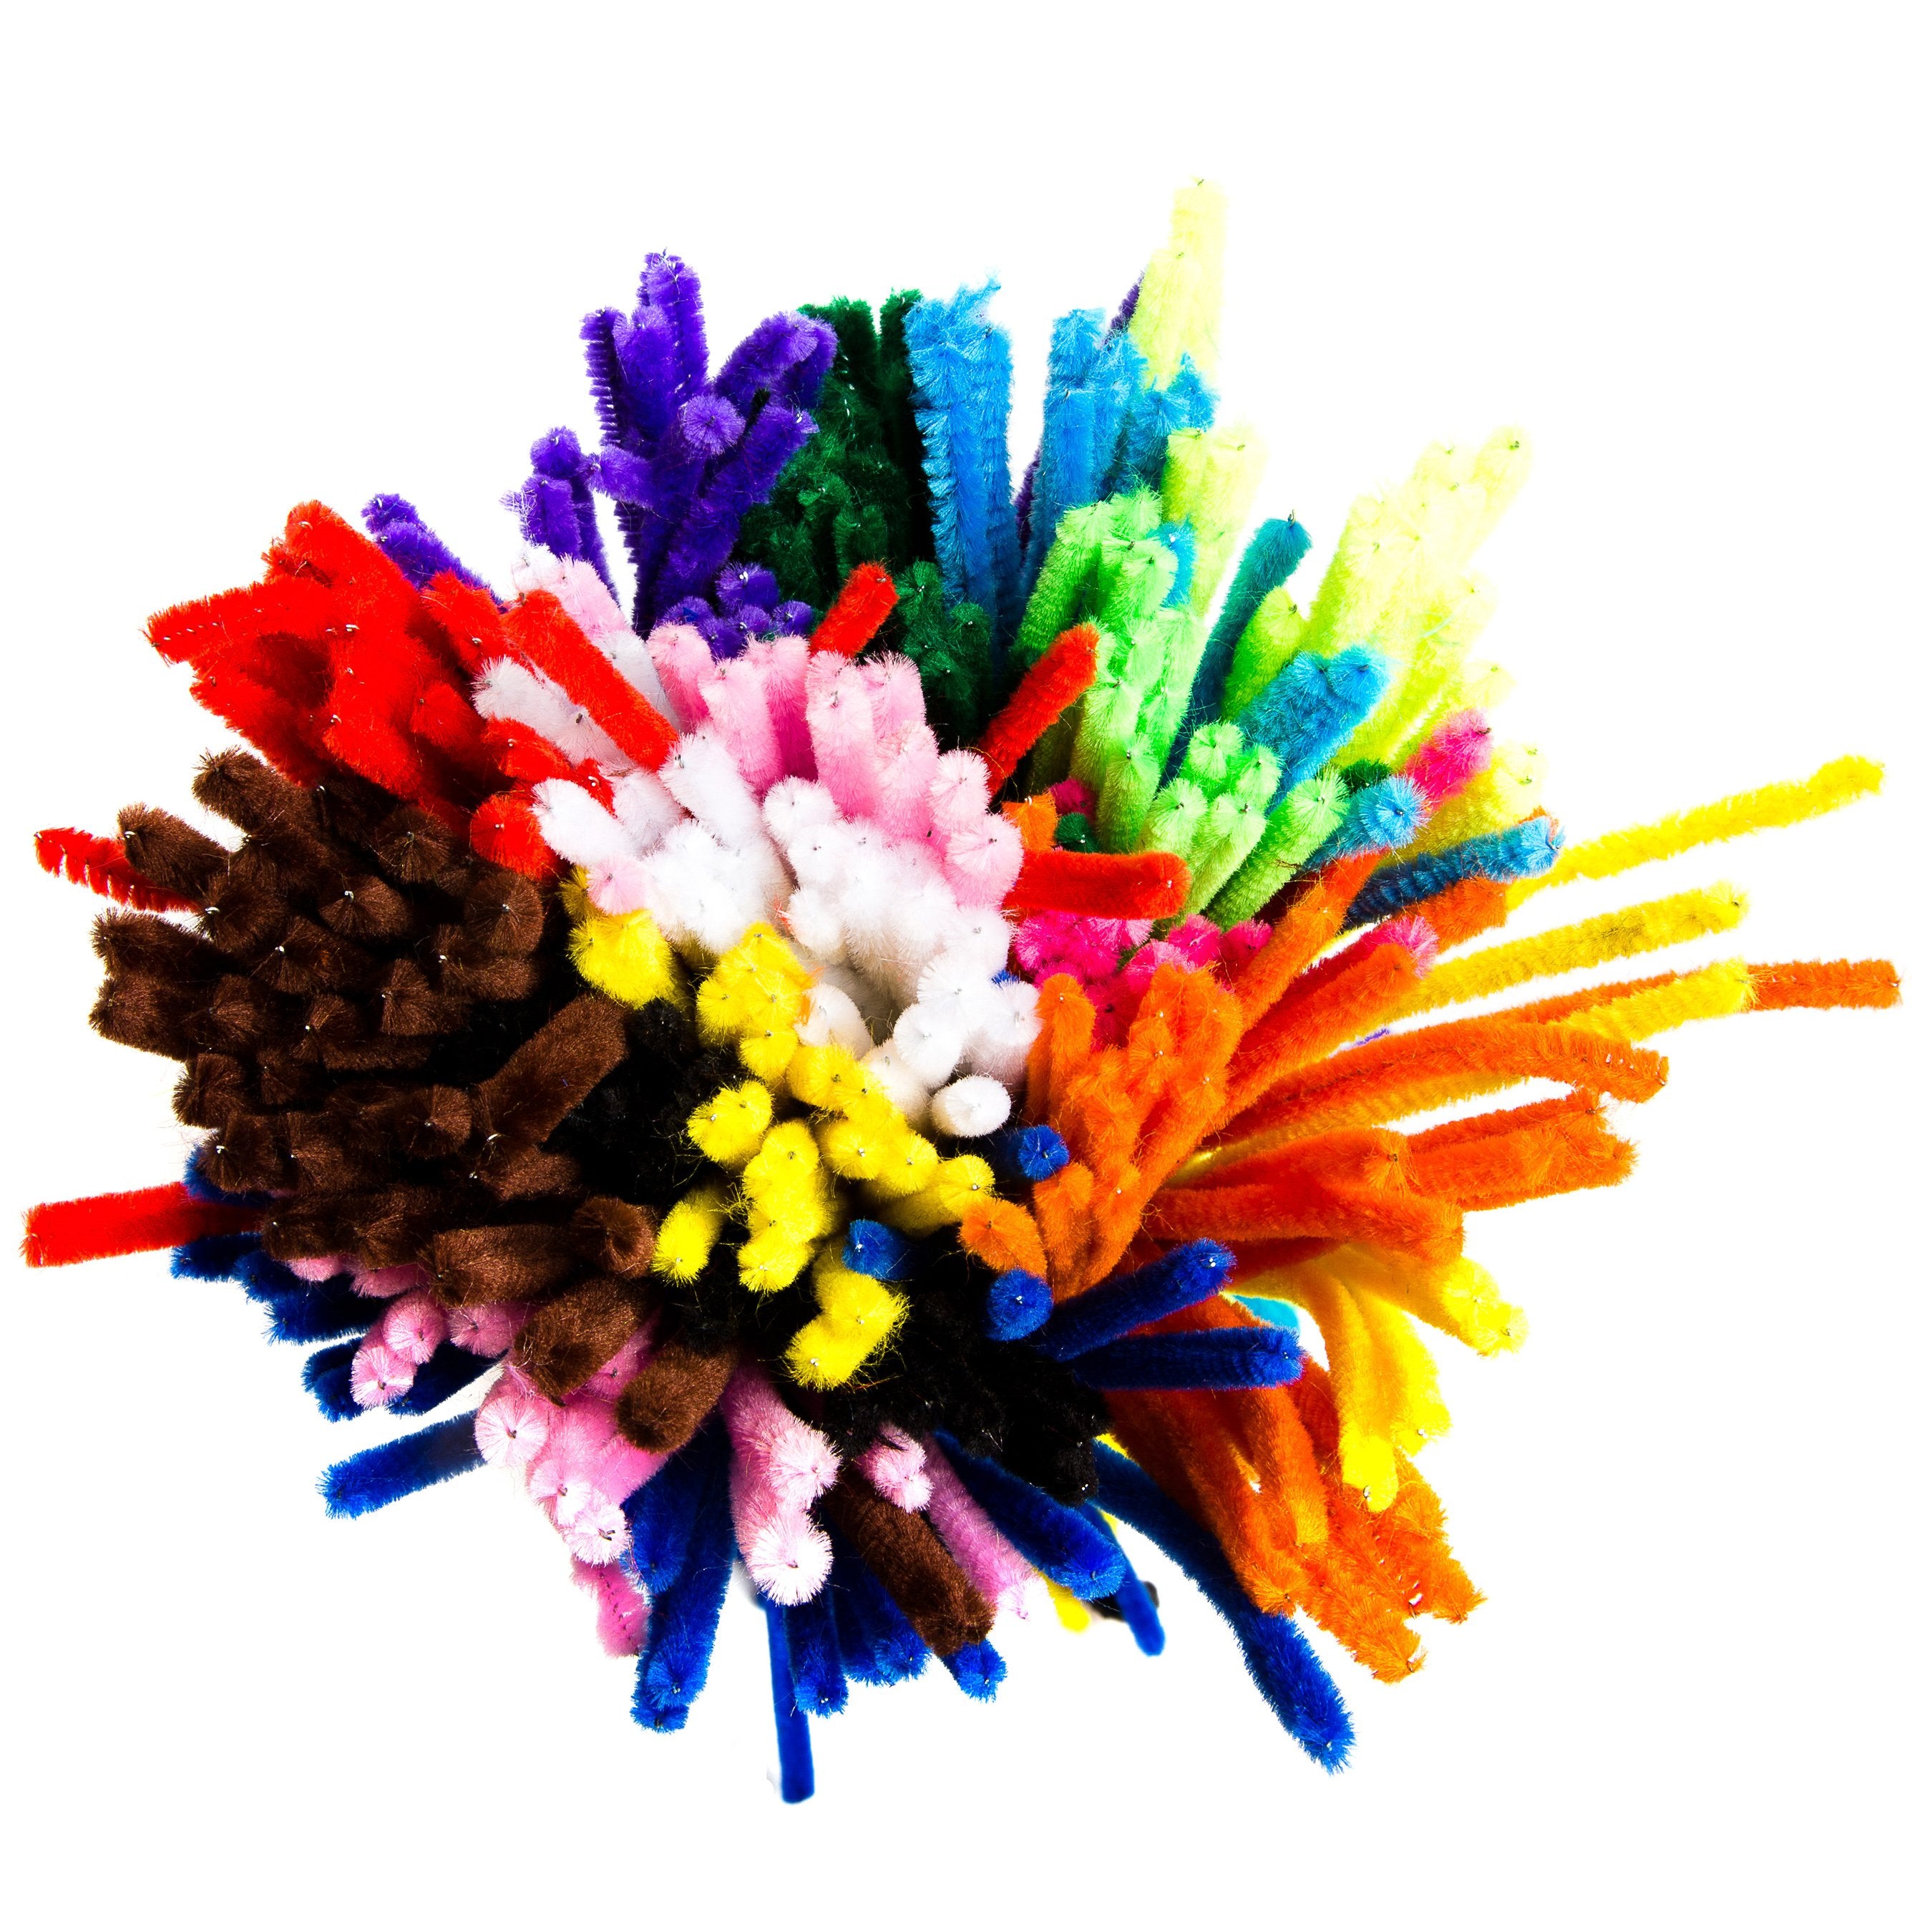 edukit Jumbo Pack of 360 Pipe Cleaners - 10 Assorted Colours - Includes 60 Fluorescent Colours (360 pack)